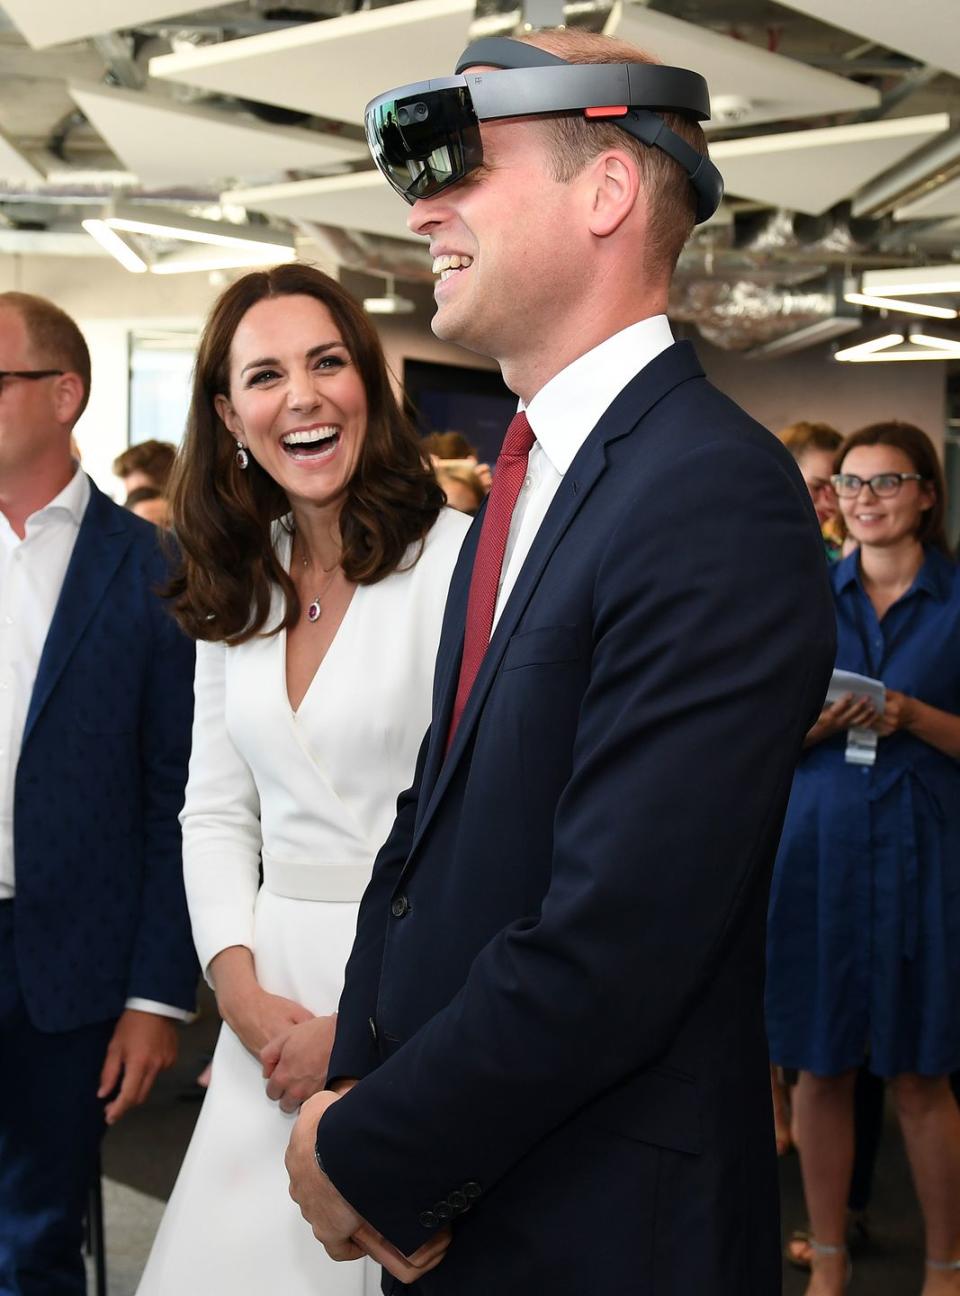 Kate can't stop laughing as Will tries on tech glasses.